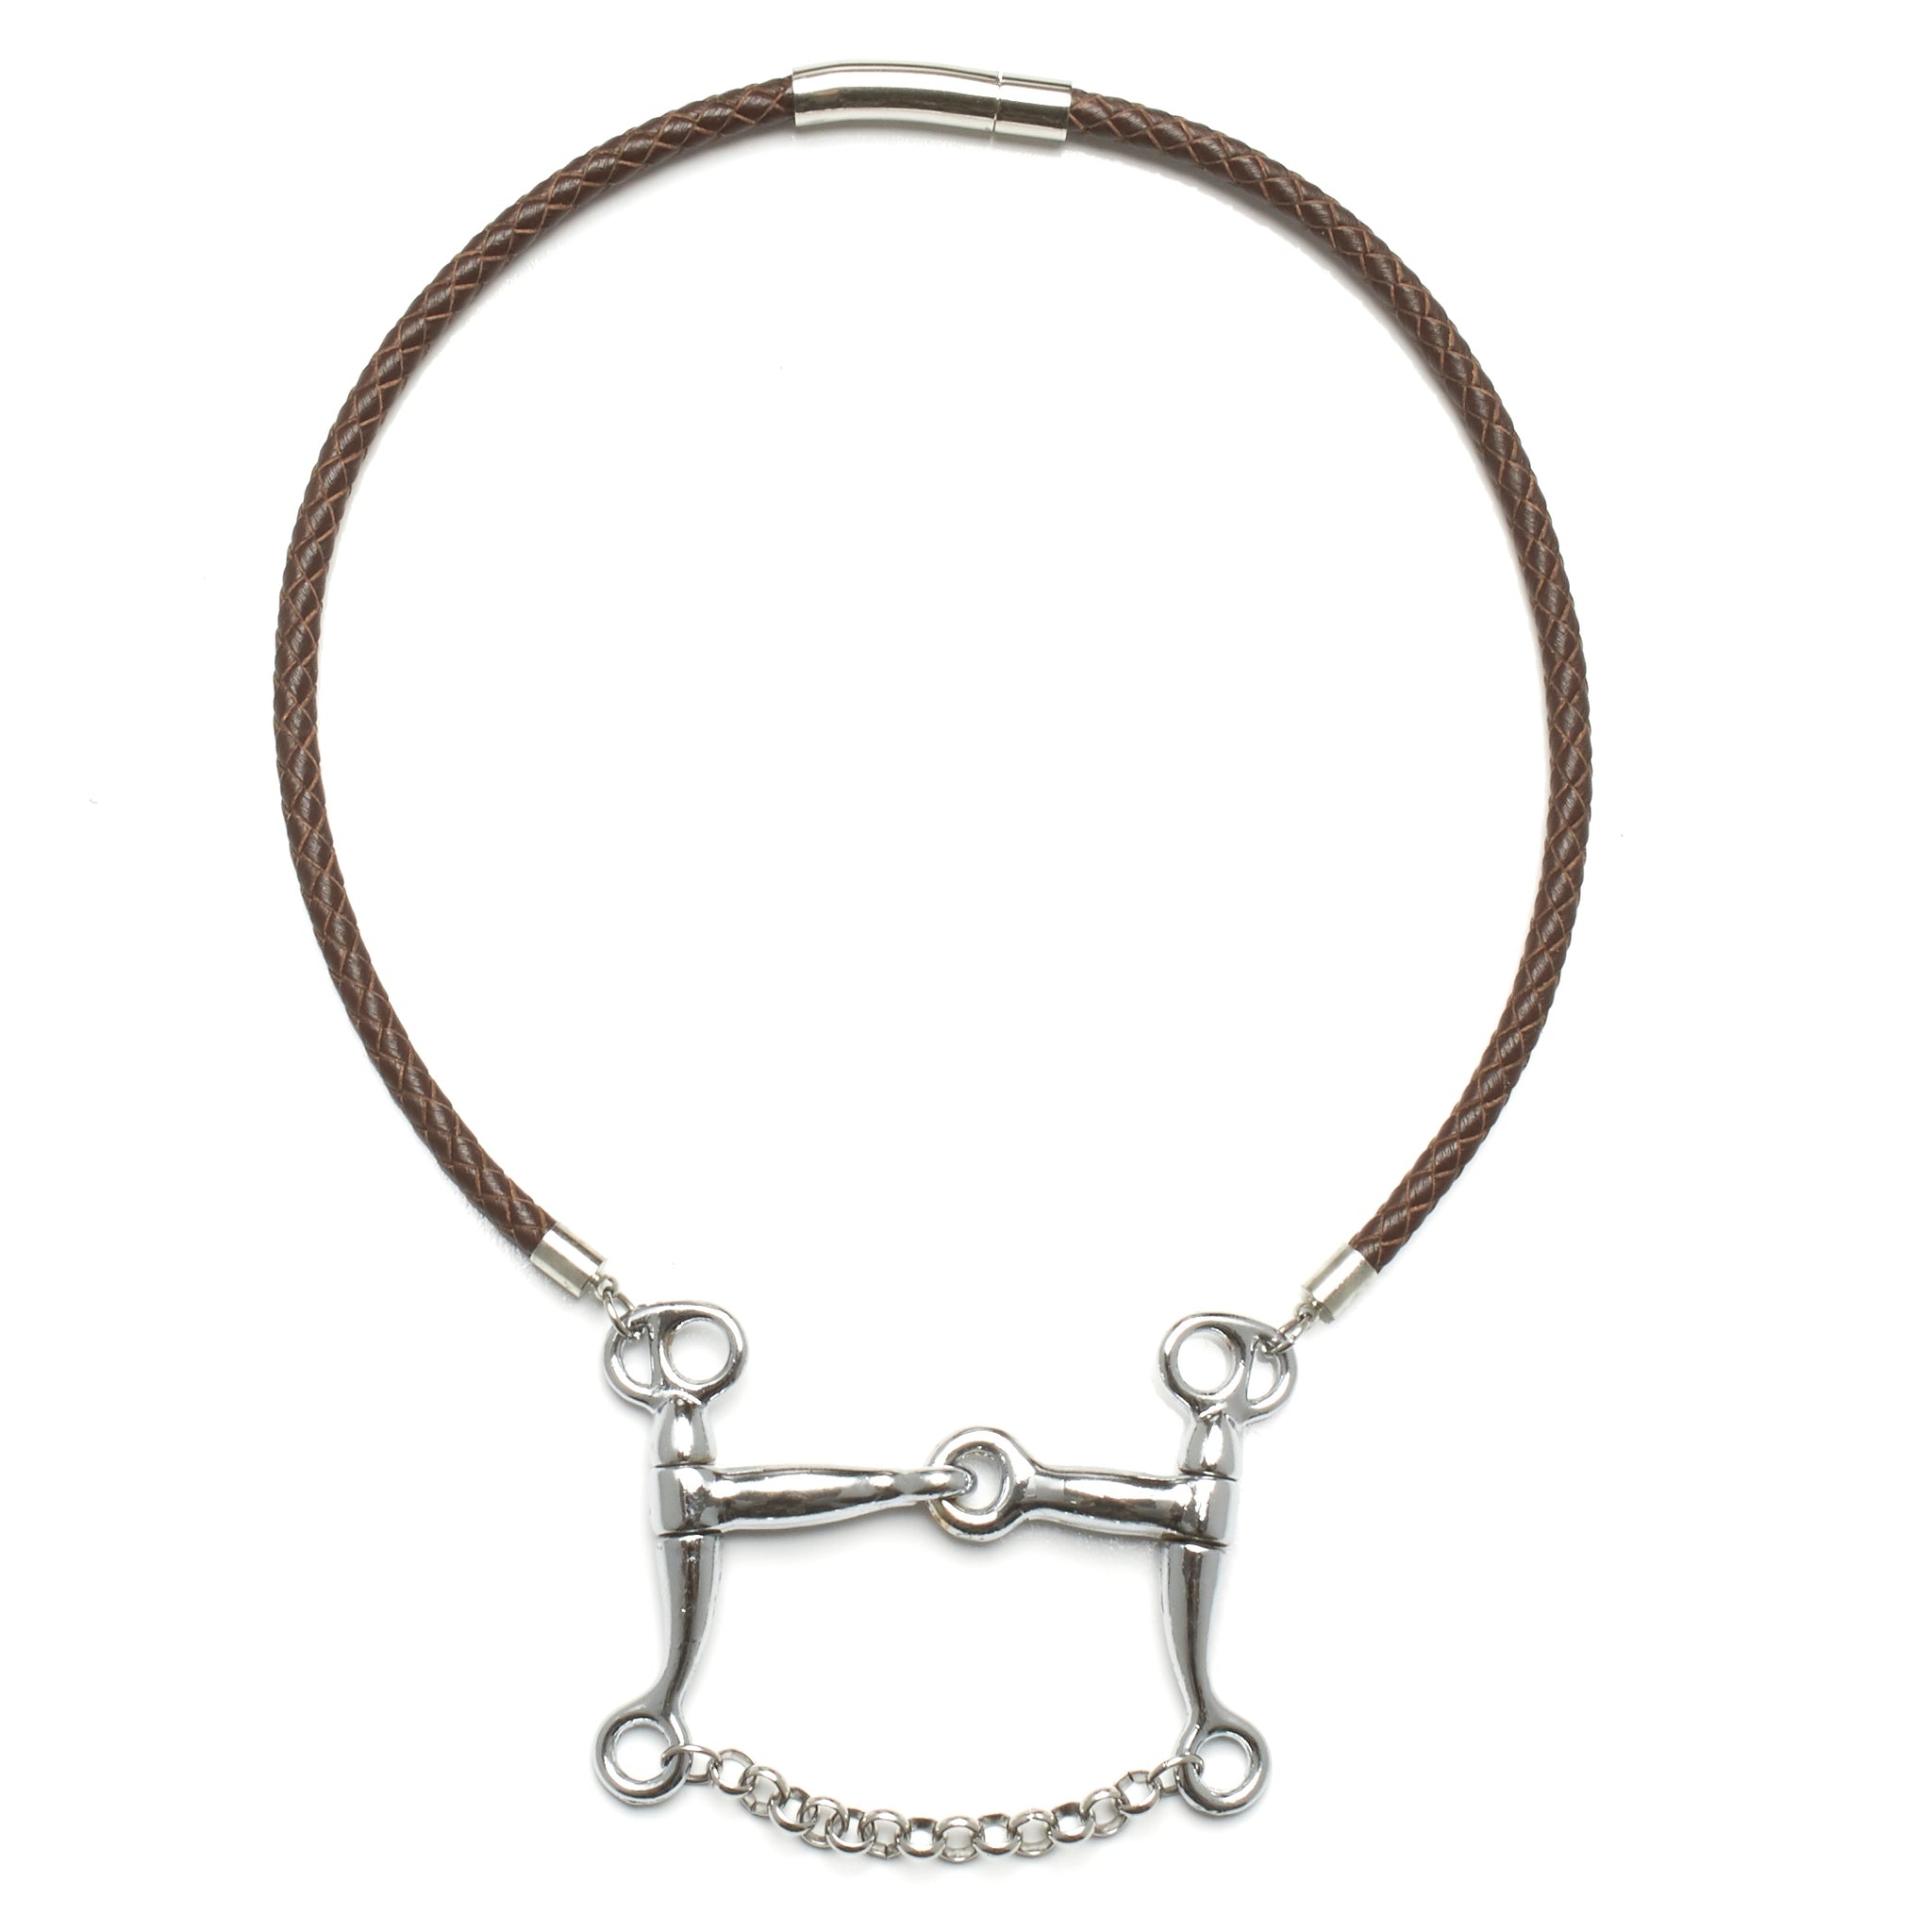 5 MM ROUND BRAIDED LEATHER NECKLACE WITH PELHAM HORSE BIT PENDANT AND CHAIN by nyet jewelry